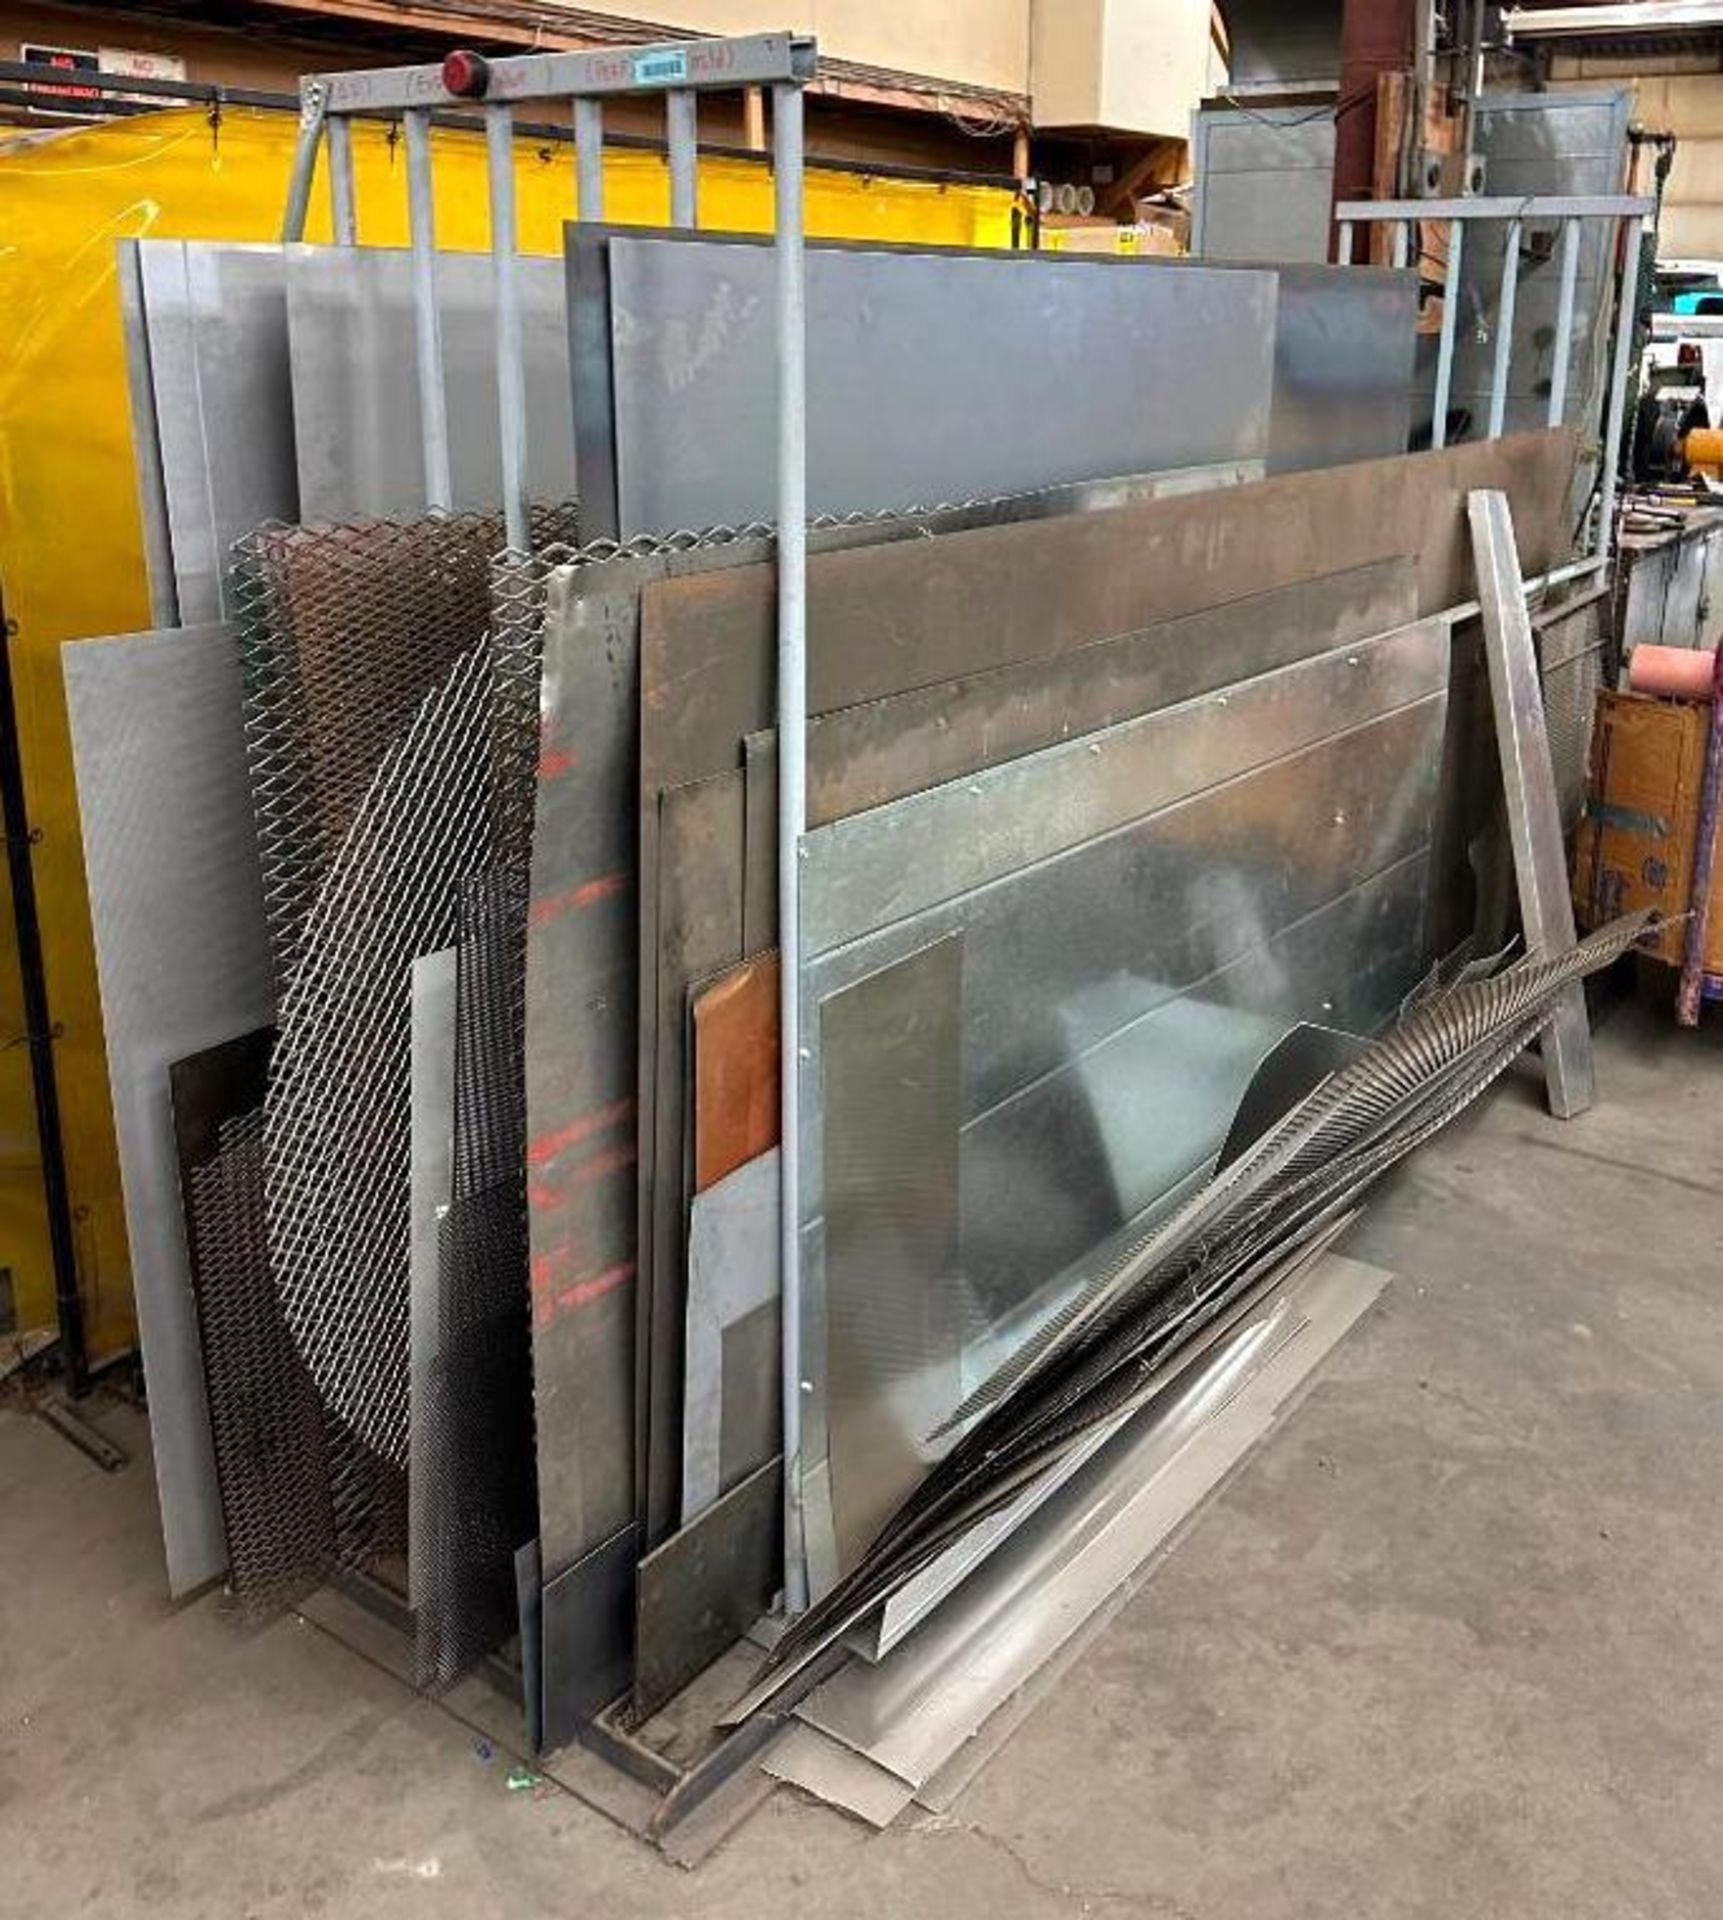 MATERIAL RACK WITH ASSORTED METAL SHEETING